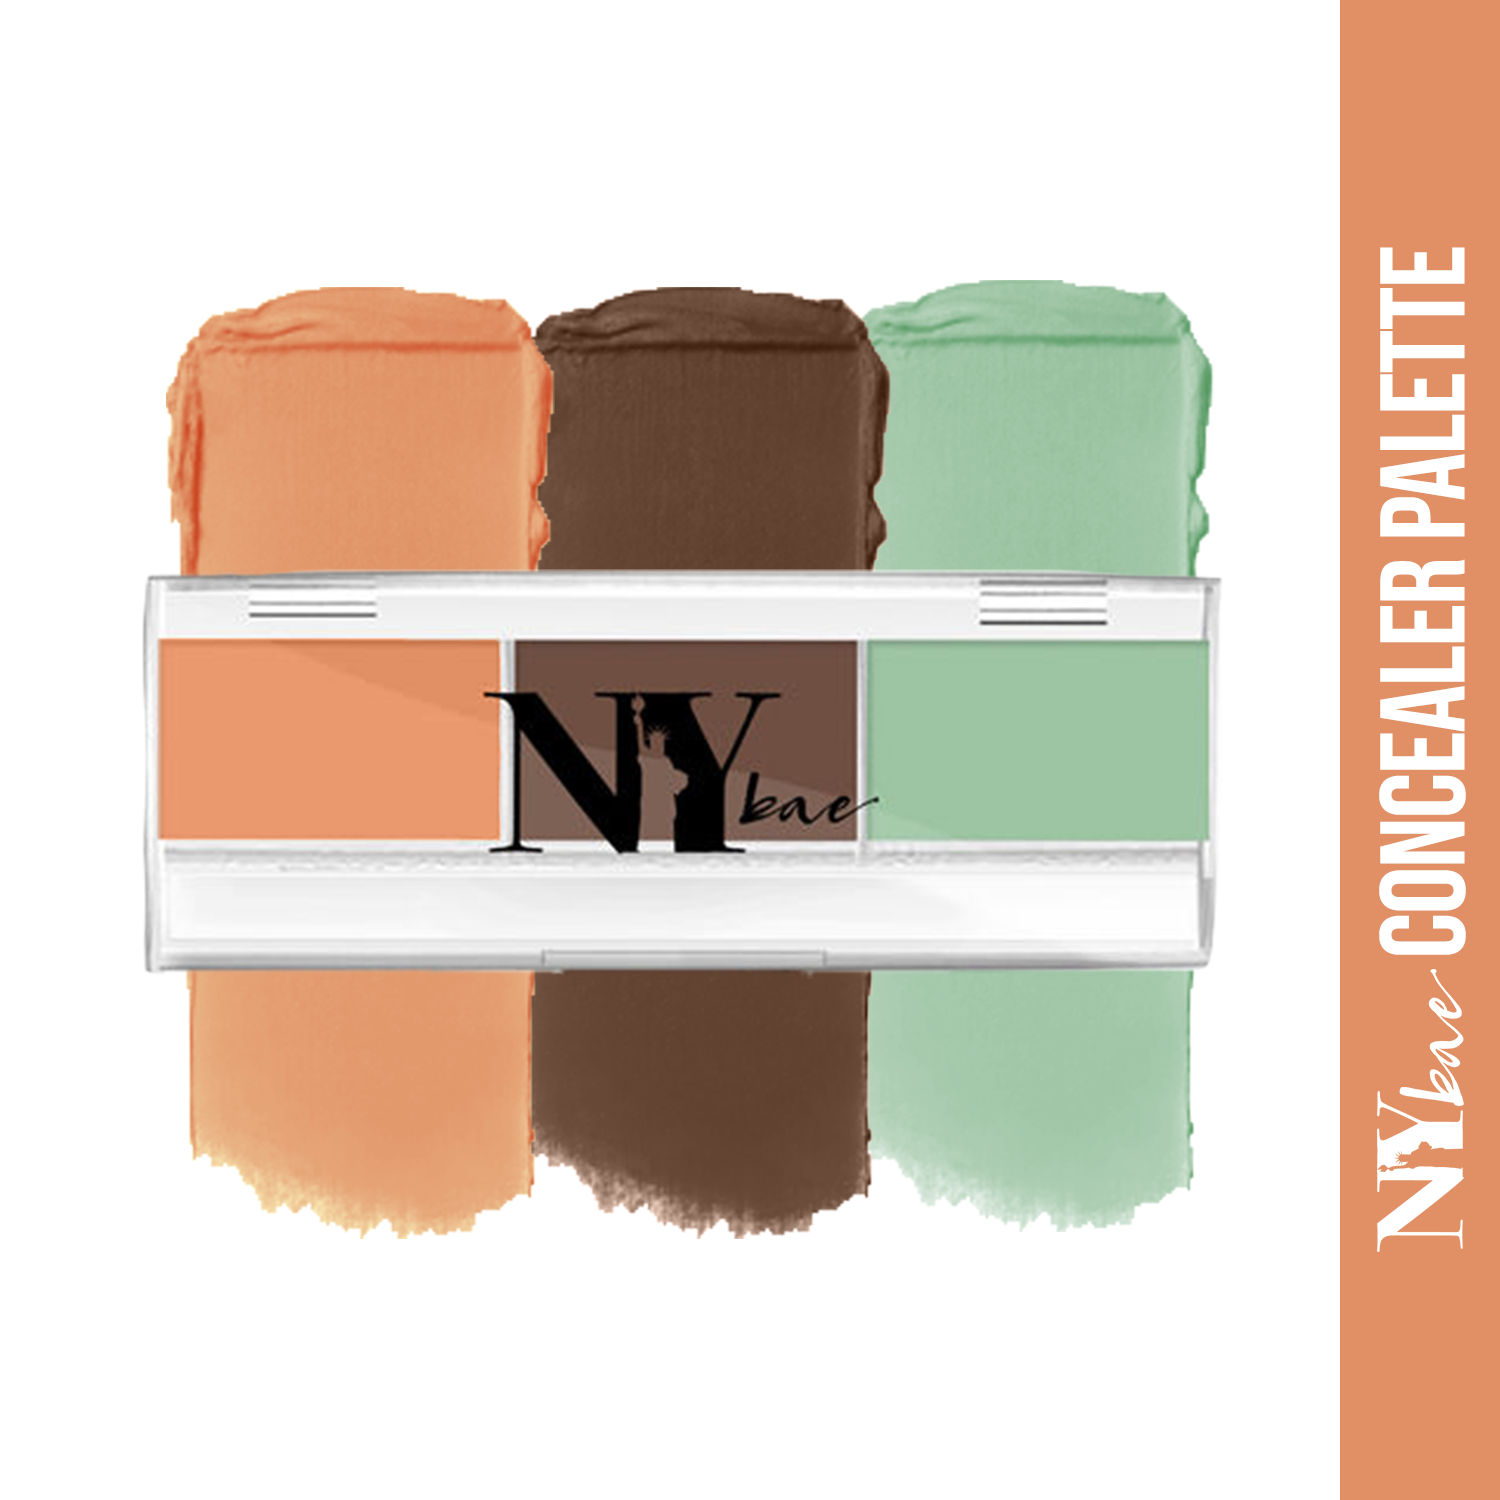 Buy NY Bae Concealer & Contour Palette with Green Color Corrector, For Wheatish - Dark Skin, Maskin' at Manhattan - Caramel Pulitzer Light Show 15 (1.5 g X 3) - Purplle